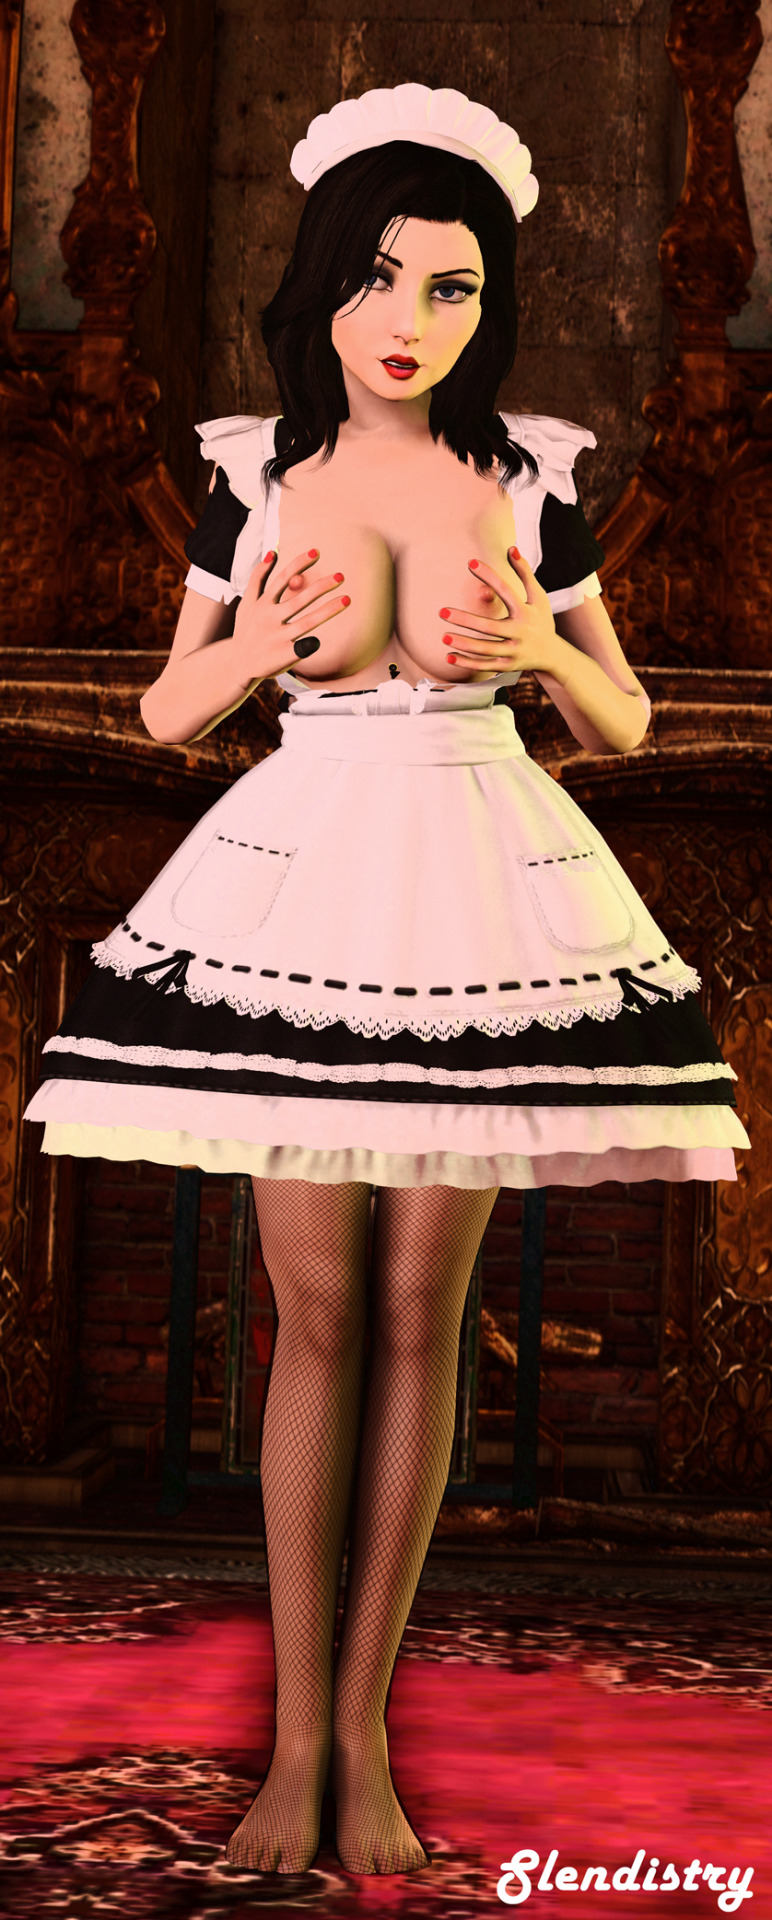 slendistry:  Liz Maid outfitFull Size (4k)I hacked on Kokoro’s maid outfit to the